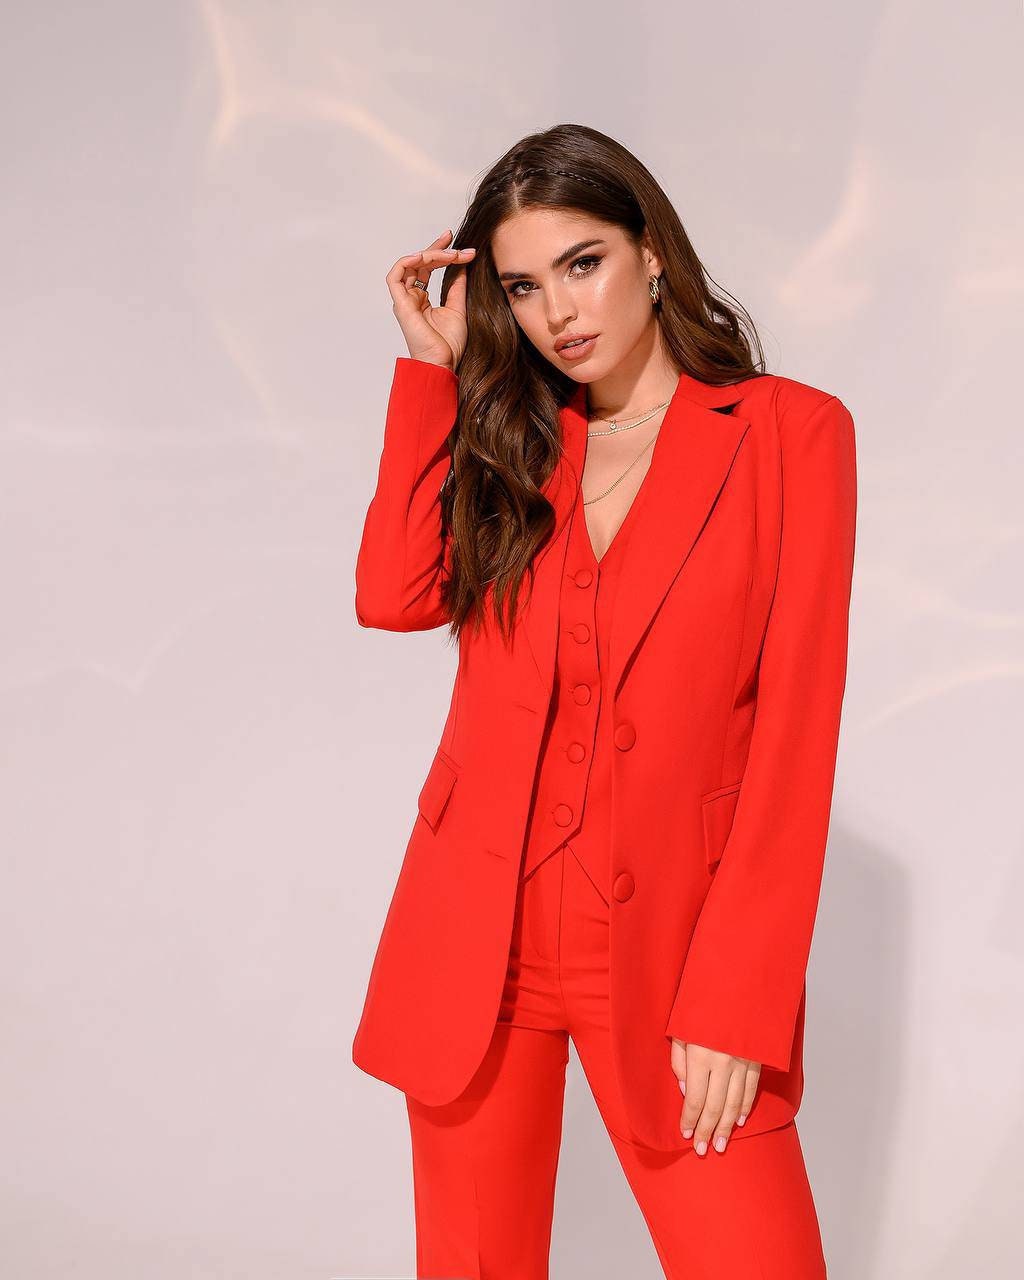 Red Pantsuit for Women, Red Formal Pants Suit Set for Women, Business Women  Suit, Red Blazer Trouser Suit for Women 